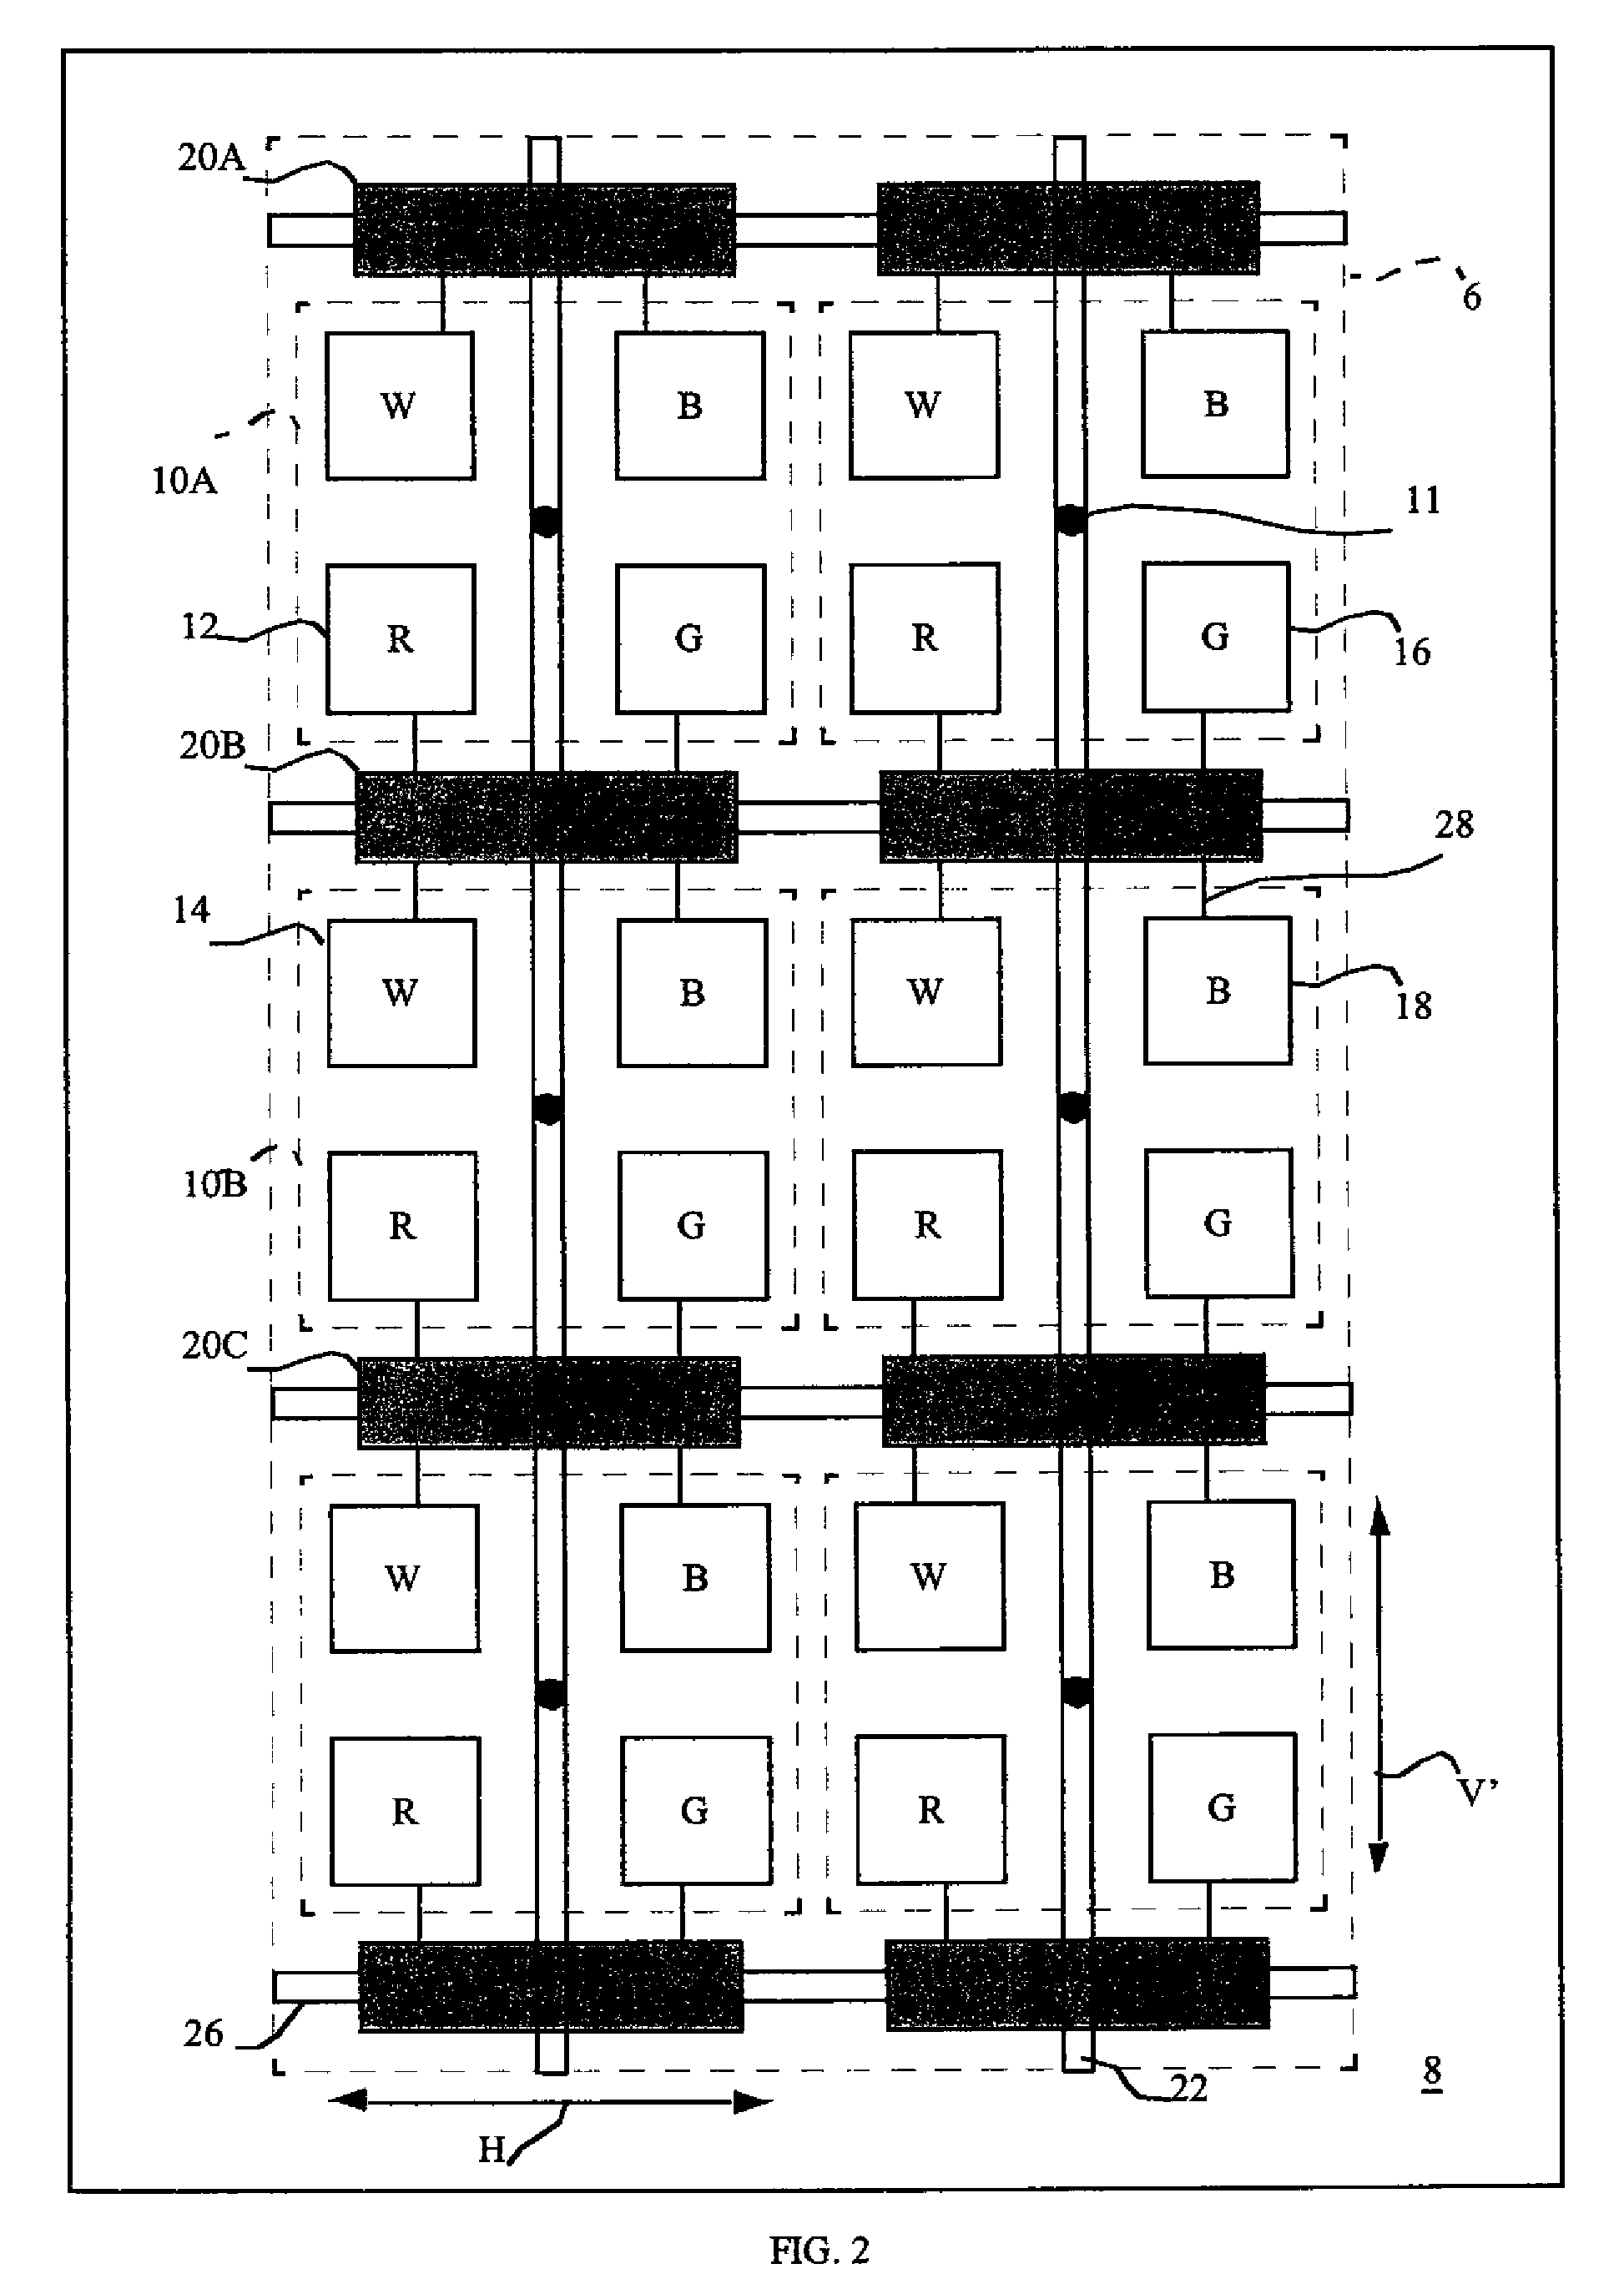 Dividing pixels between chiplets in display device